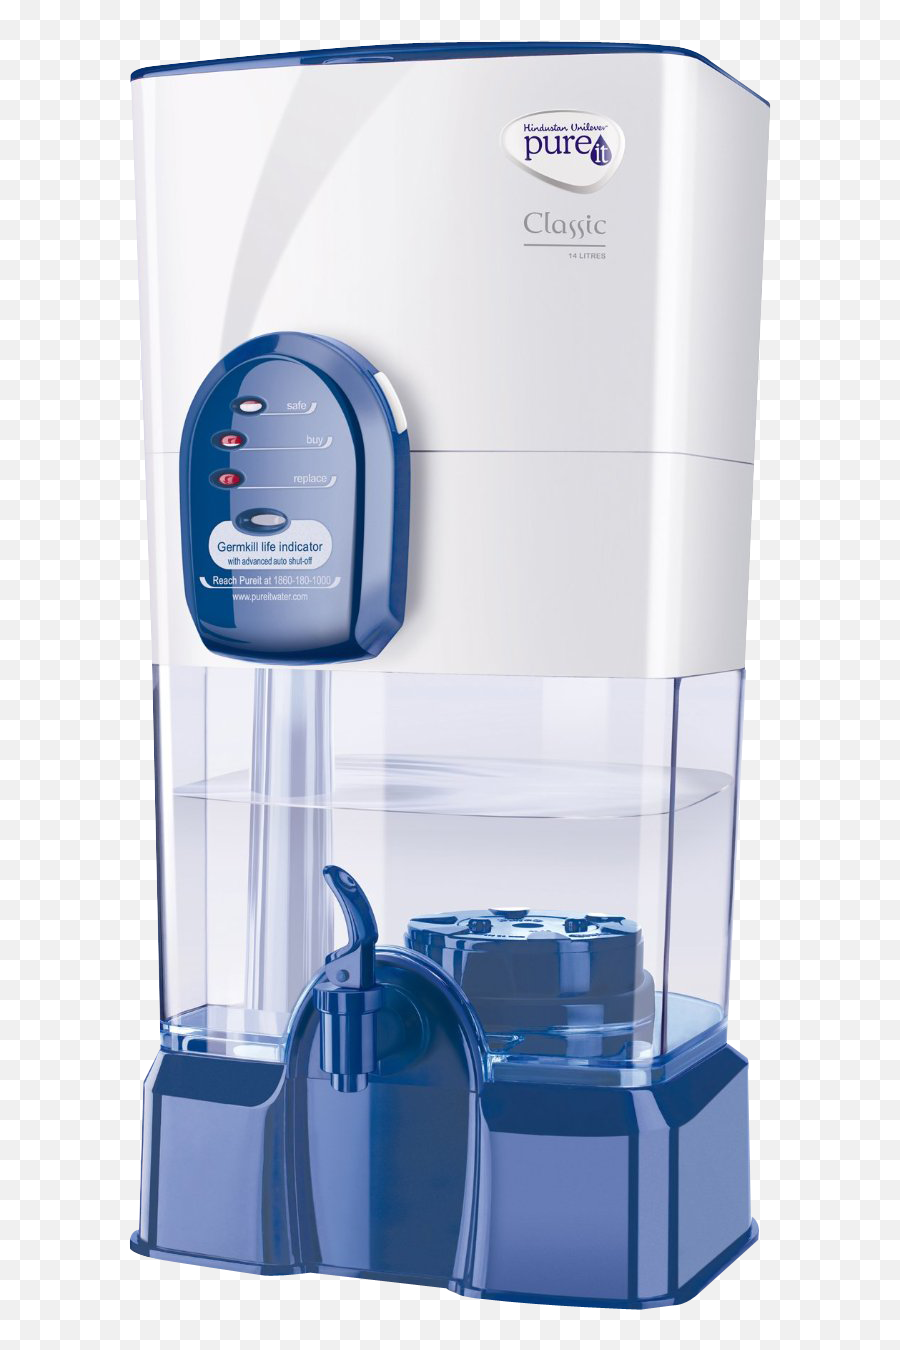 New Water Purifier Png Image Ro - 14 Litre Pureit Classic,Water Jug Png